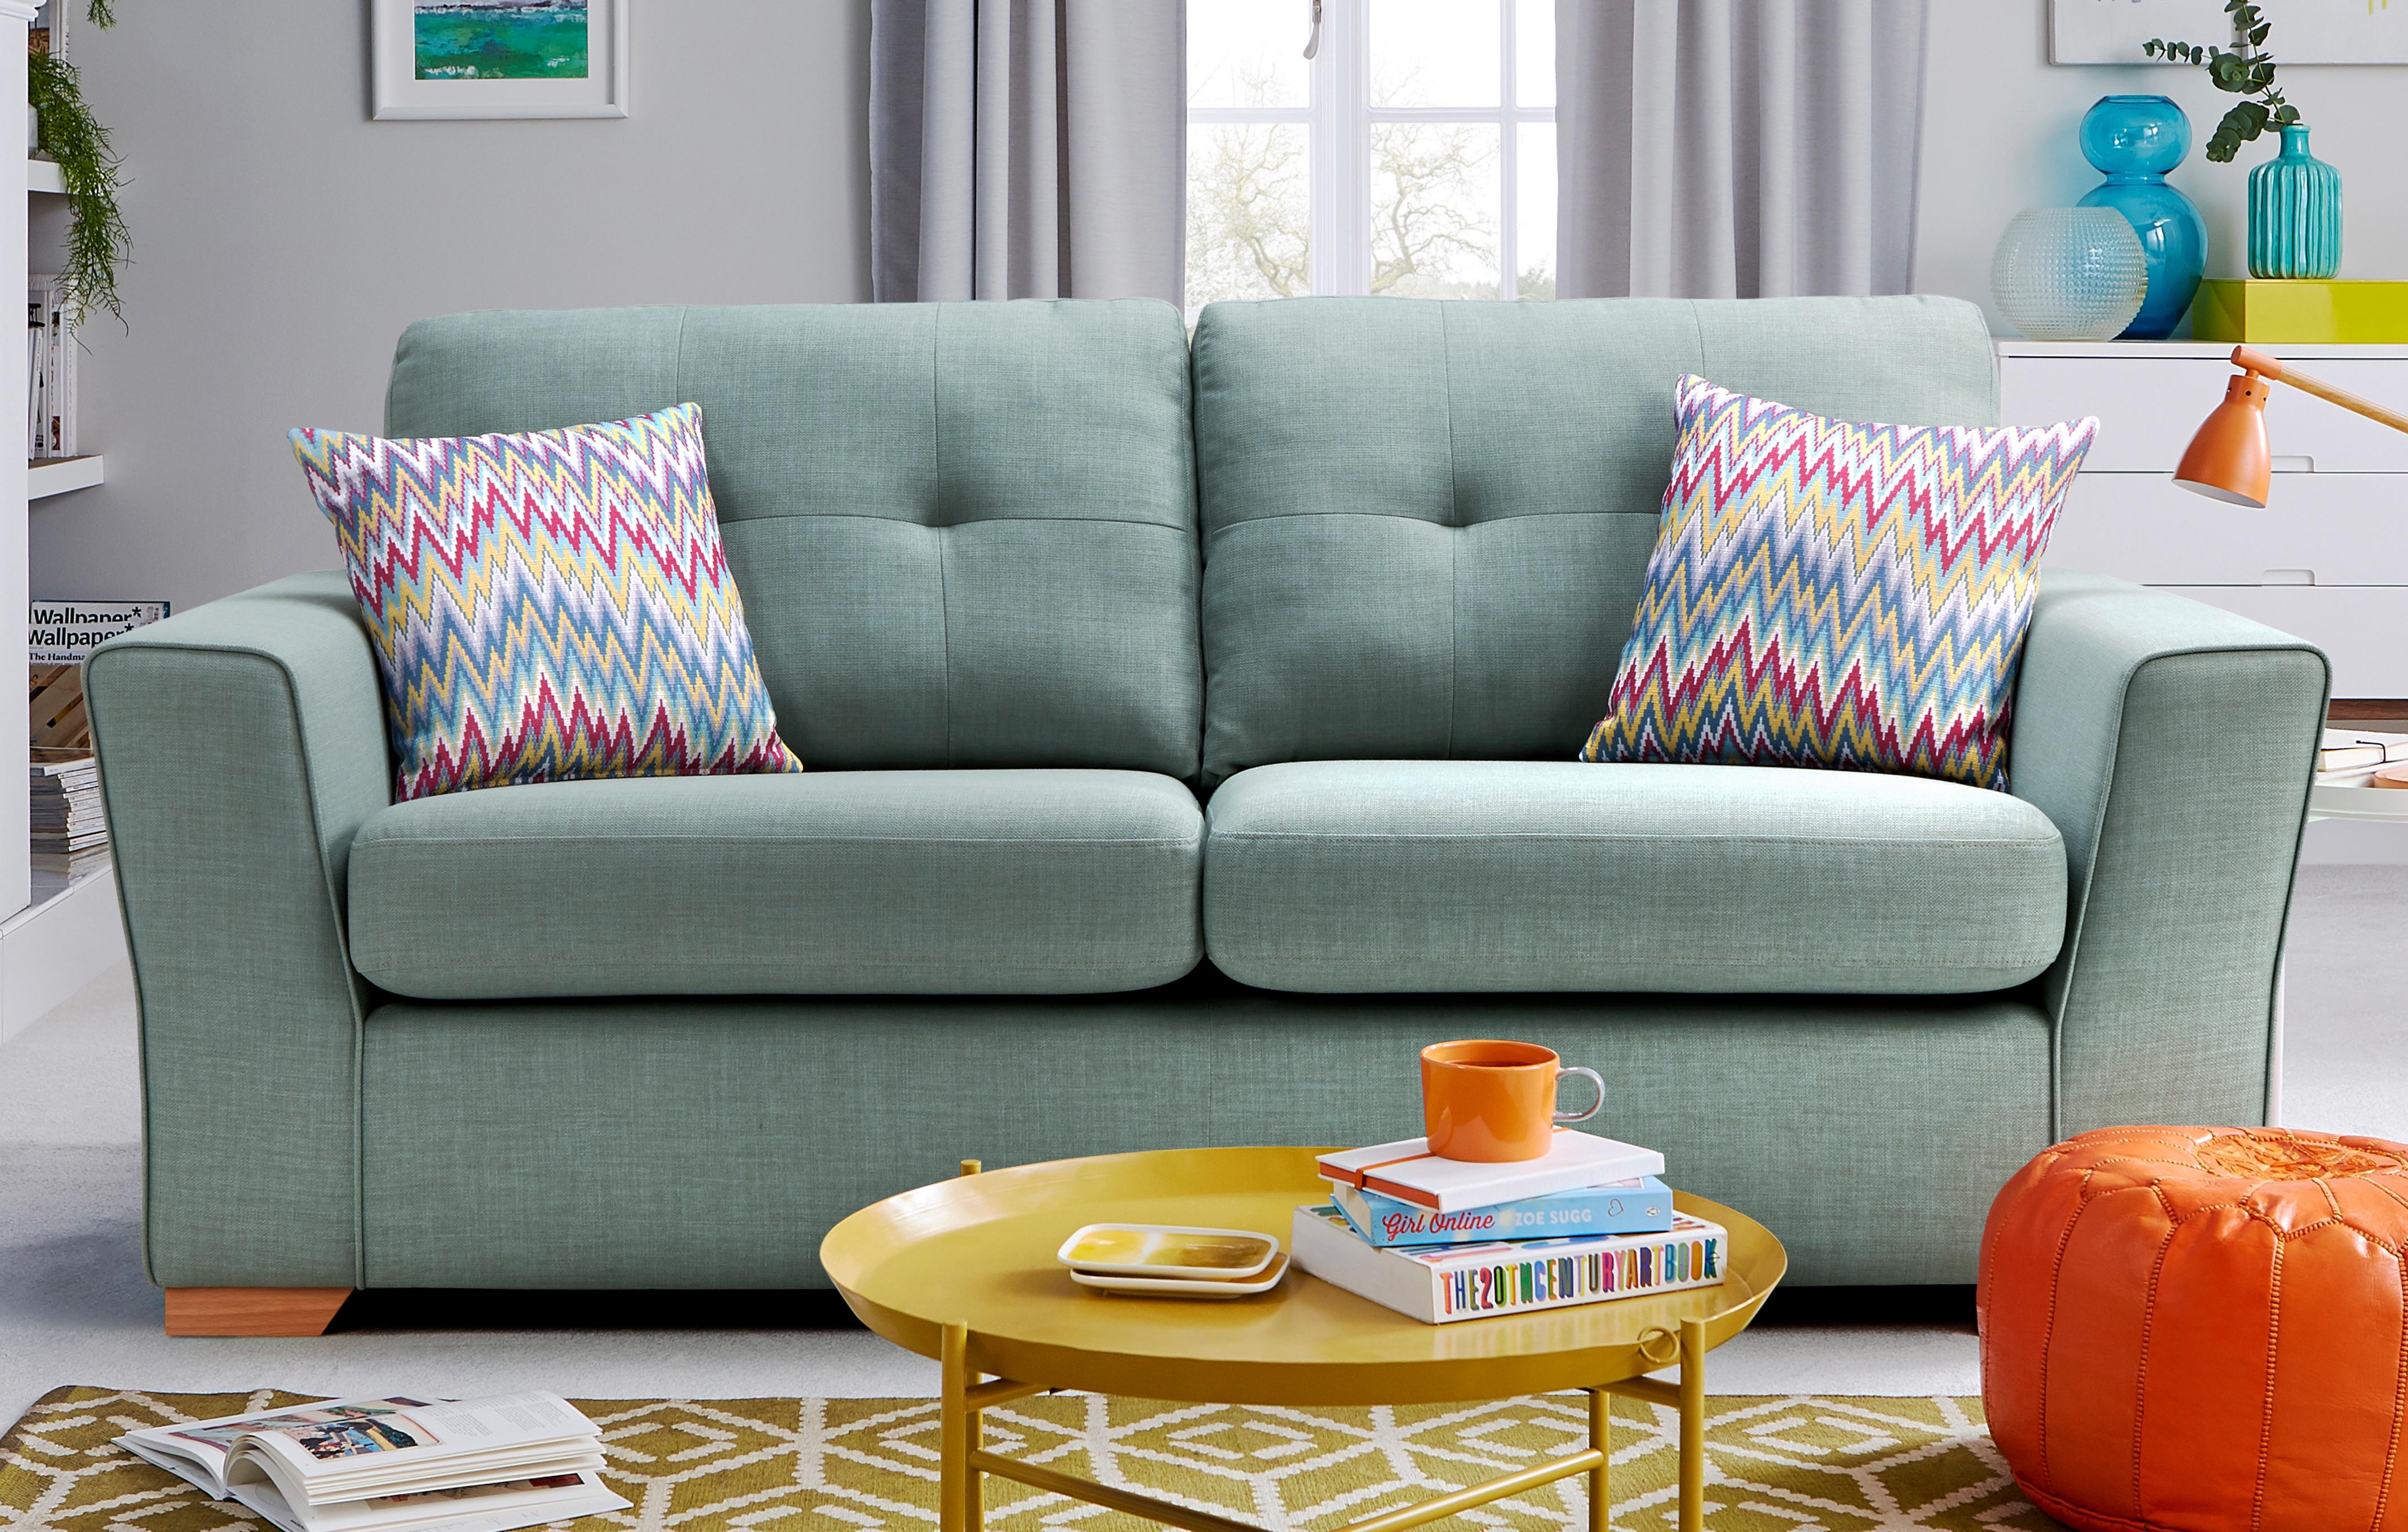 Fabric Sofa Sales And Deals Across The Full Range | DFS